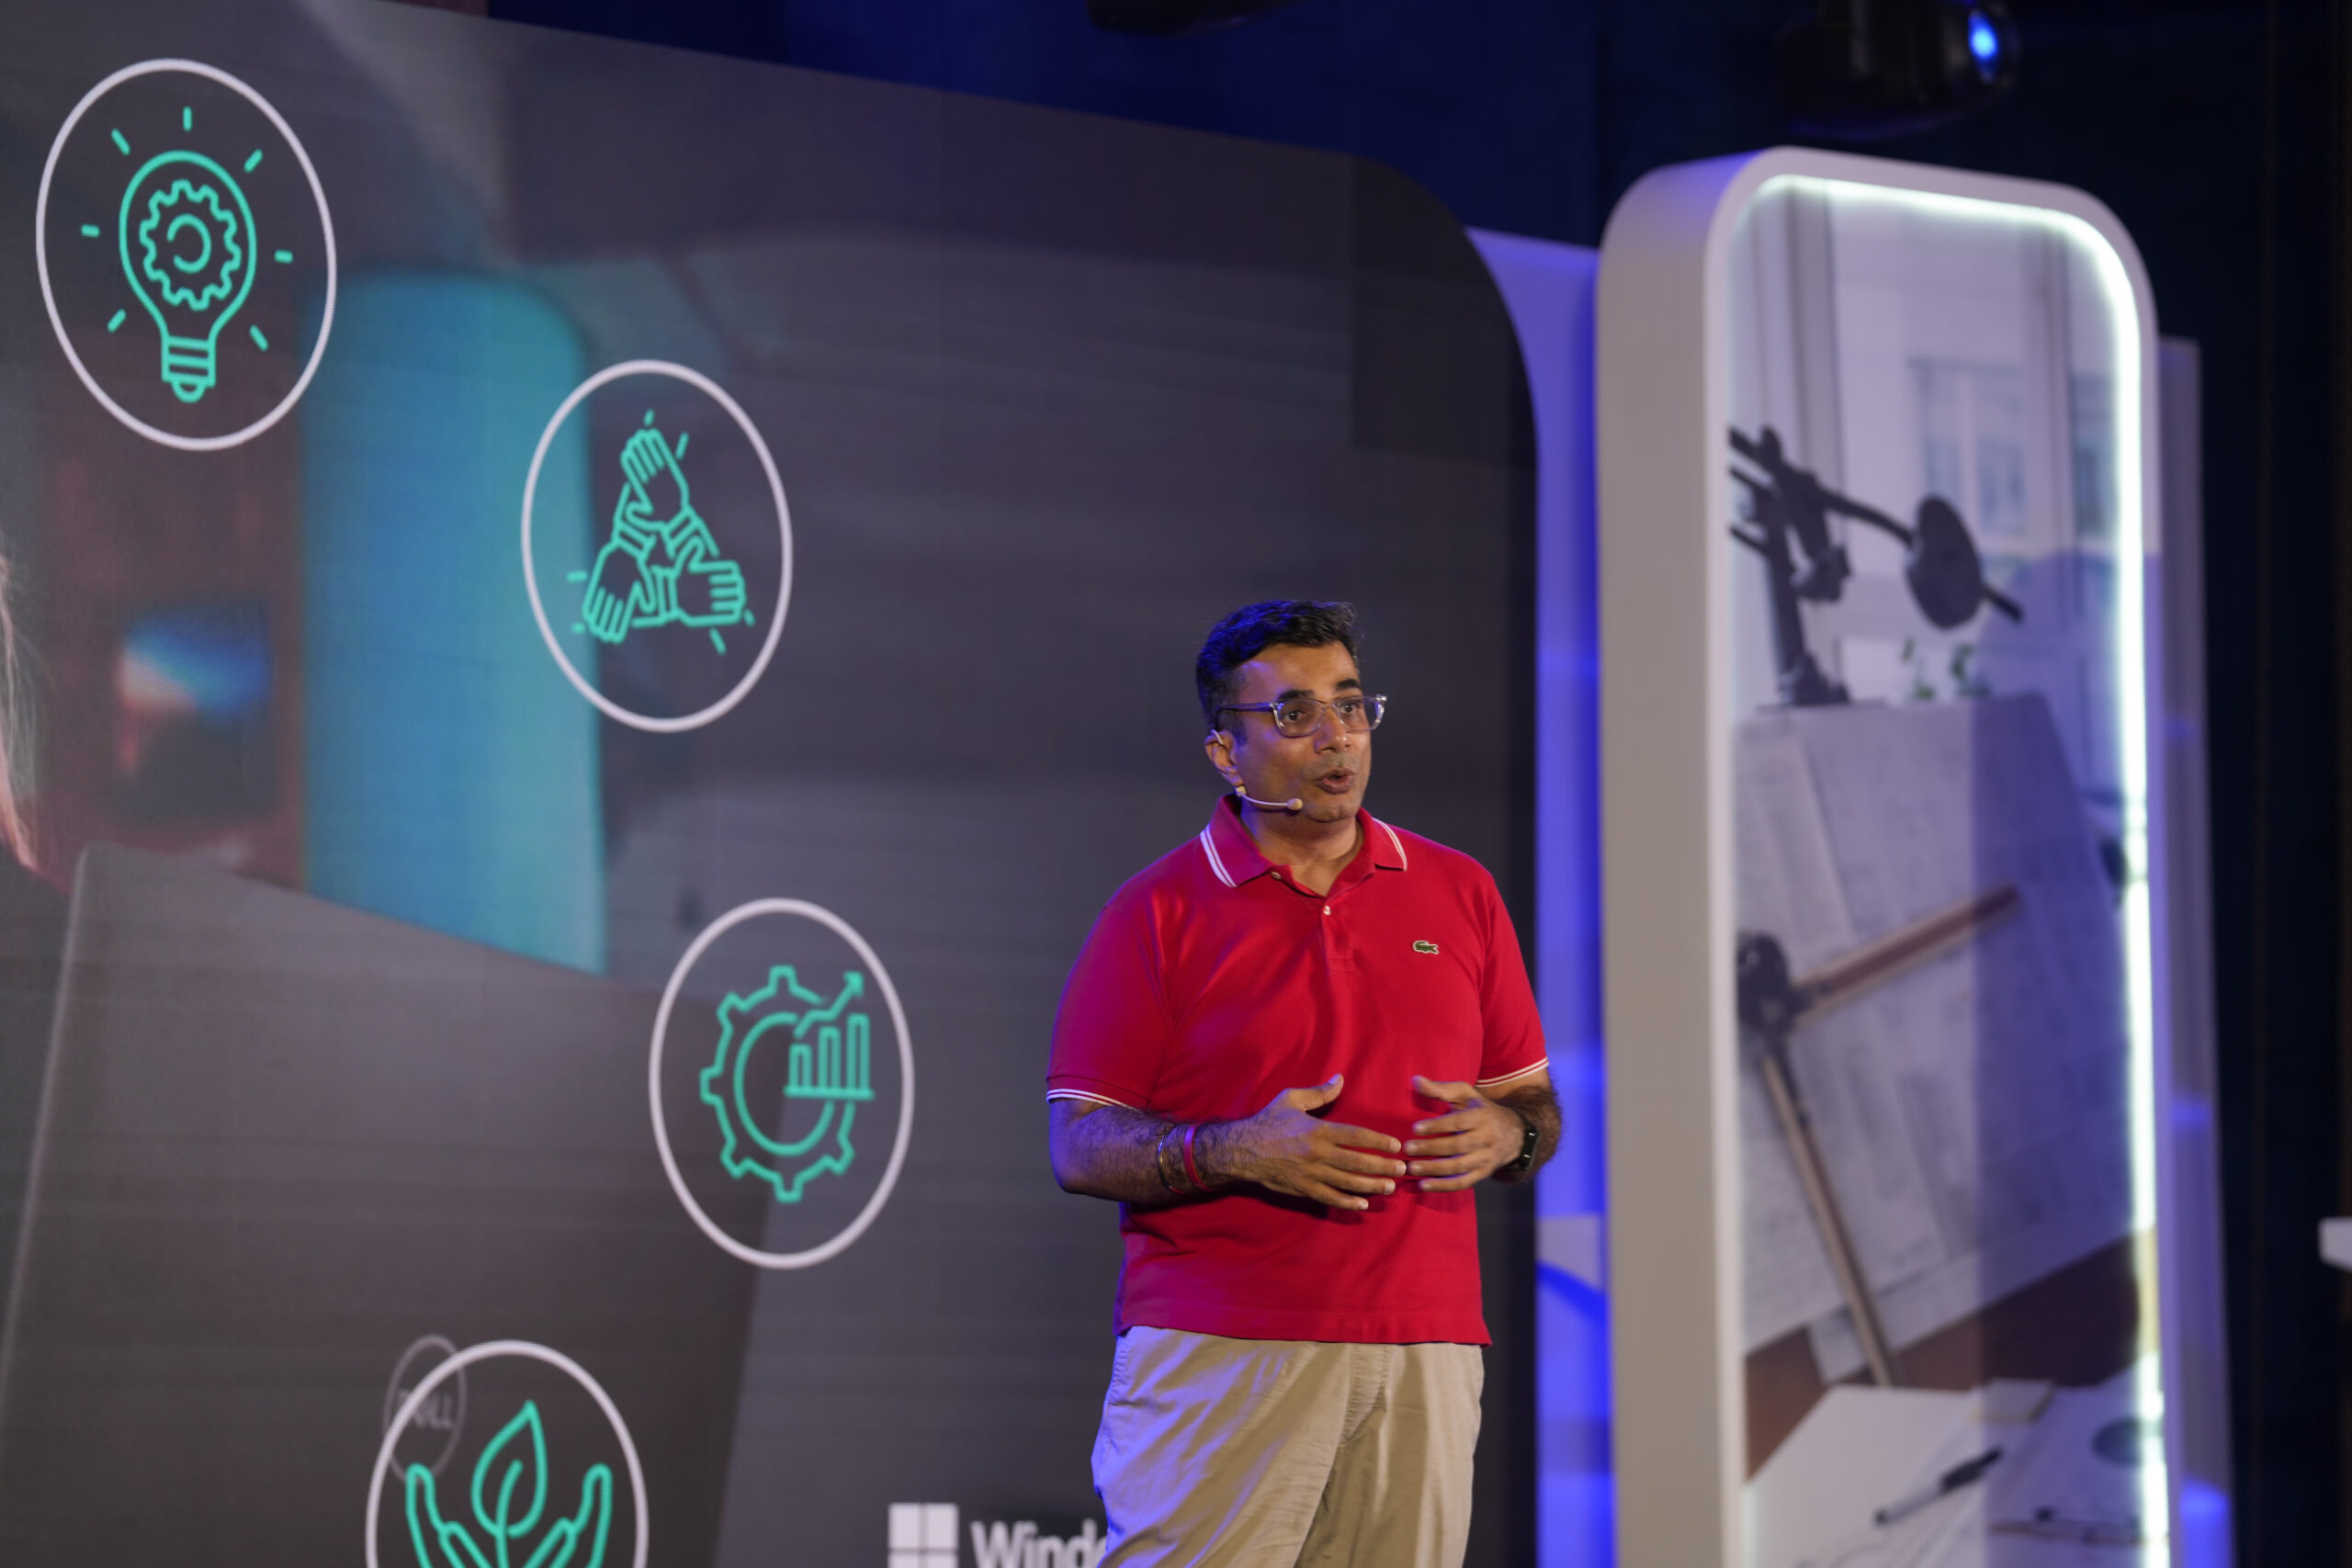 Vishal Gondal as a guest speaker and moderator for a product launch in Mumbai